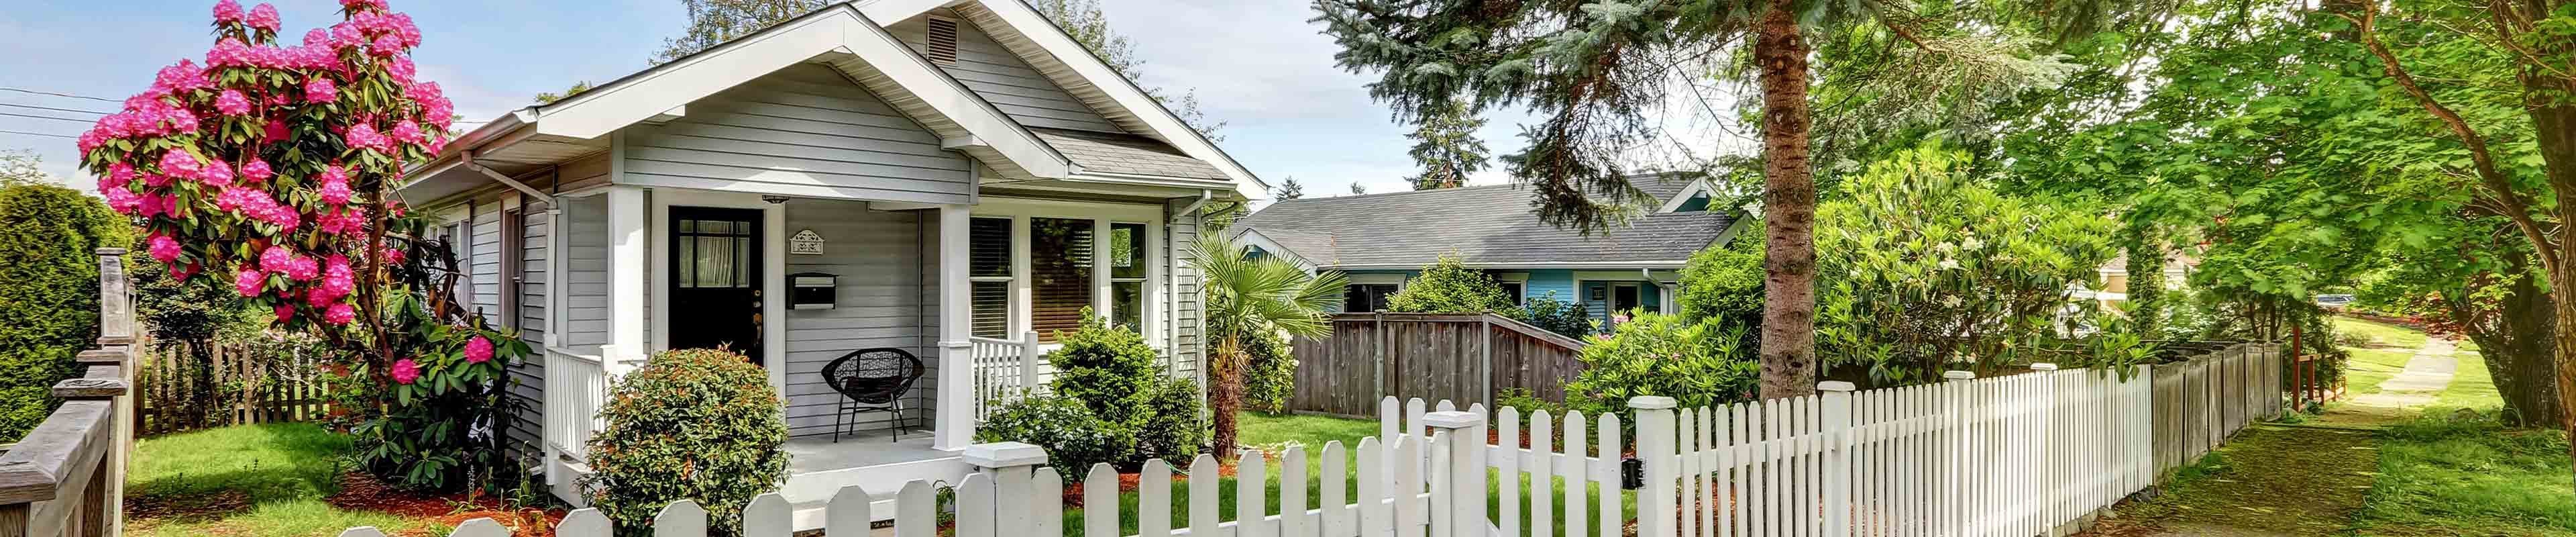 Image of a home with white picket fence and sidewalk. 